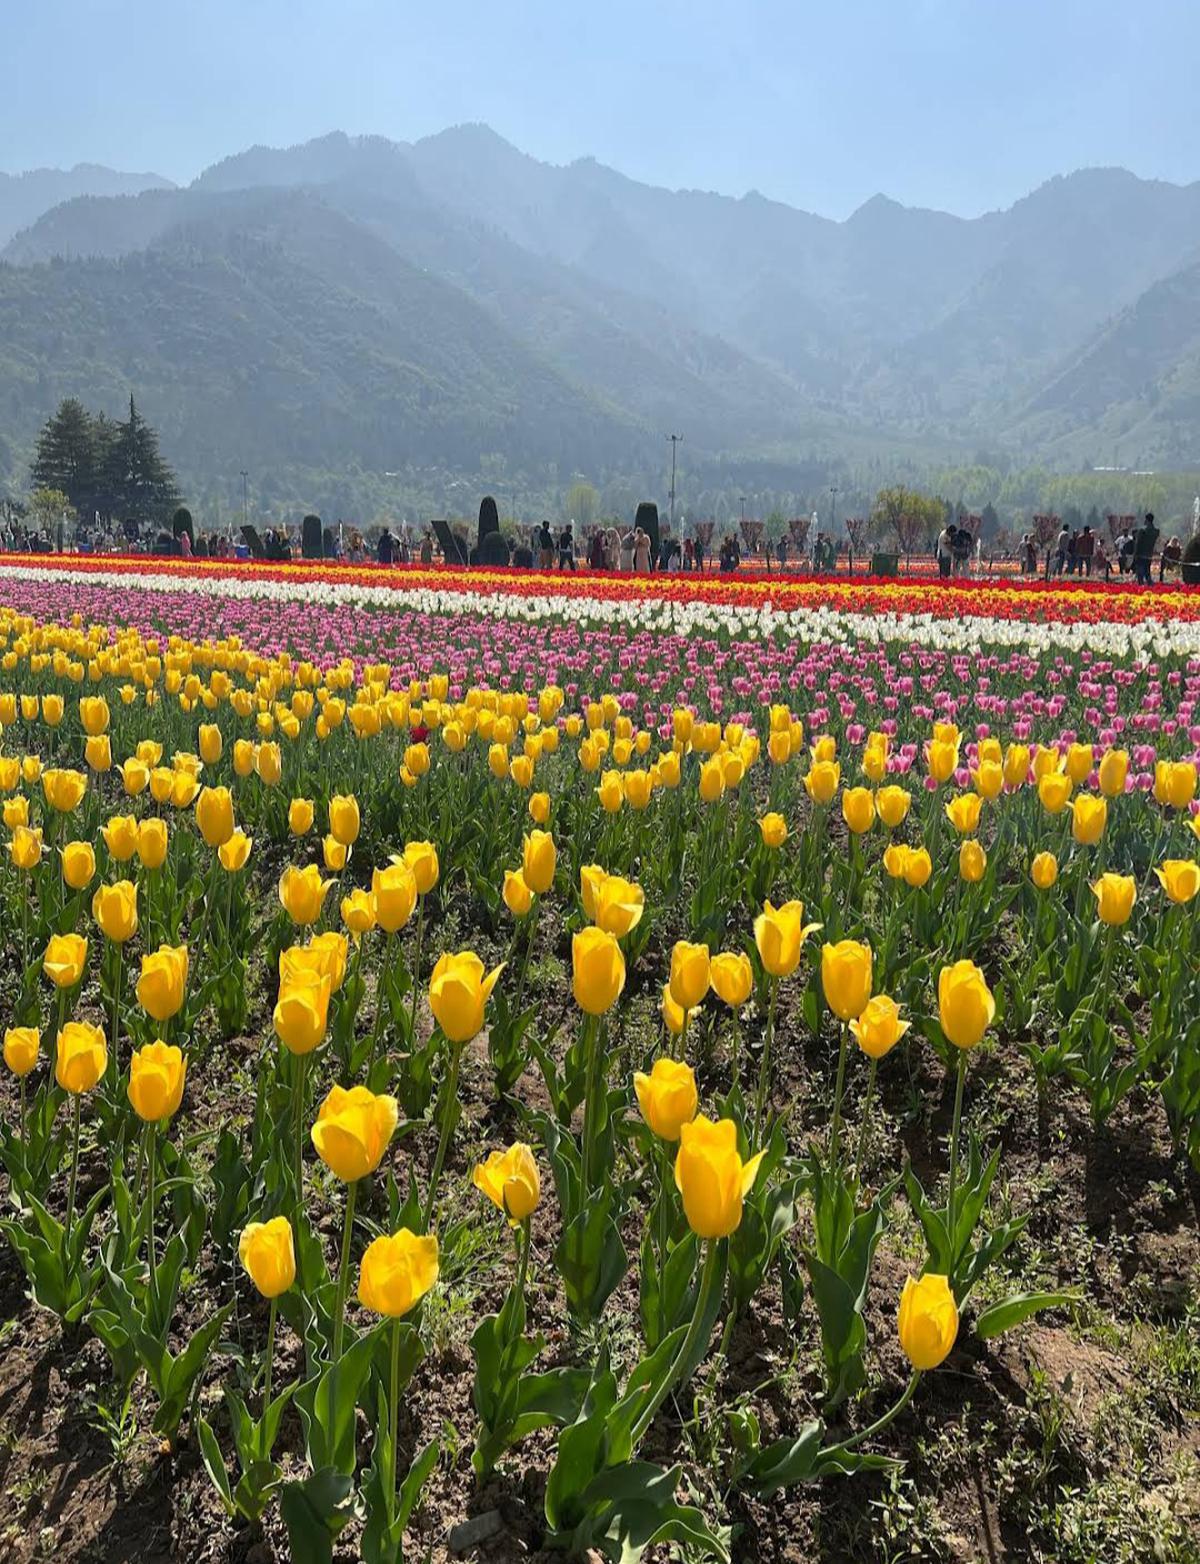 One million tulips are on display at the tulip festival in Srinagar